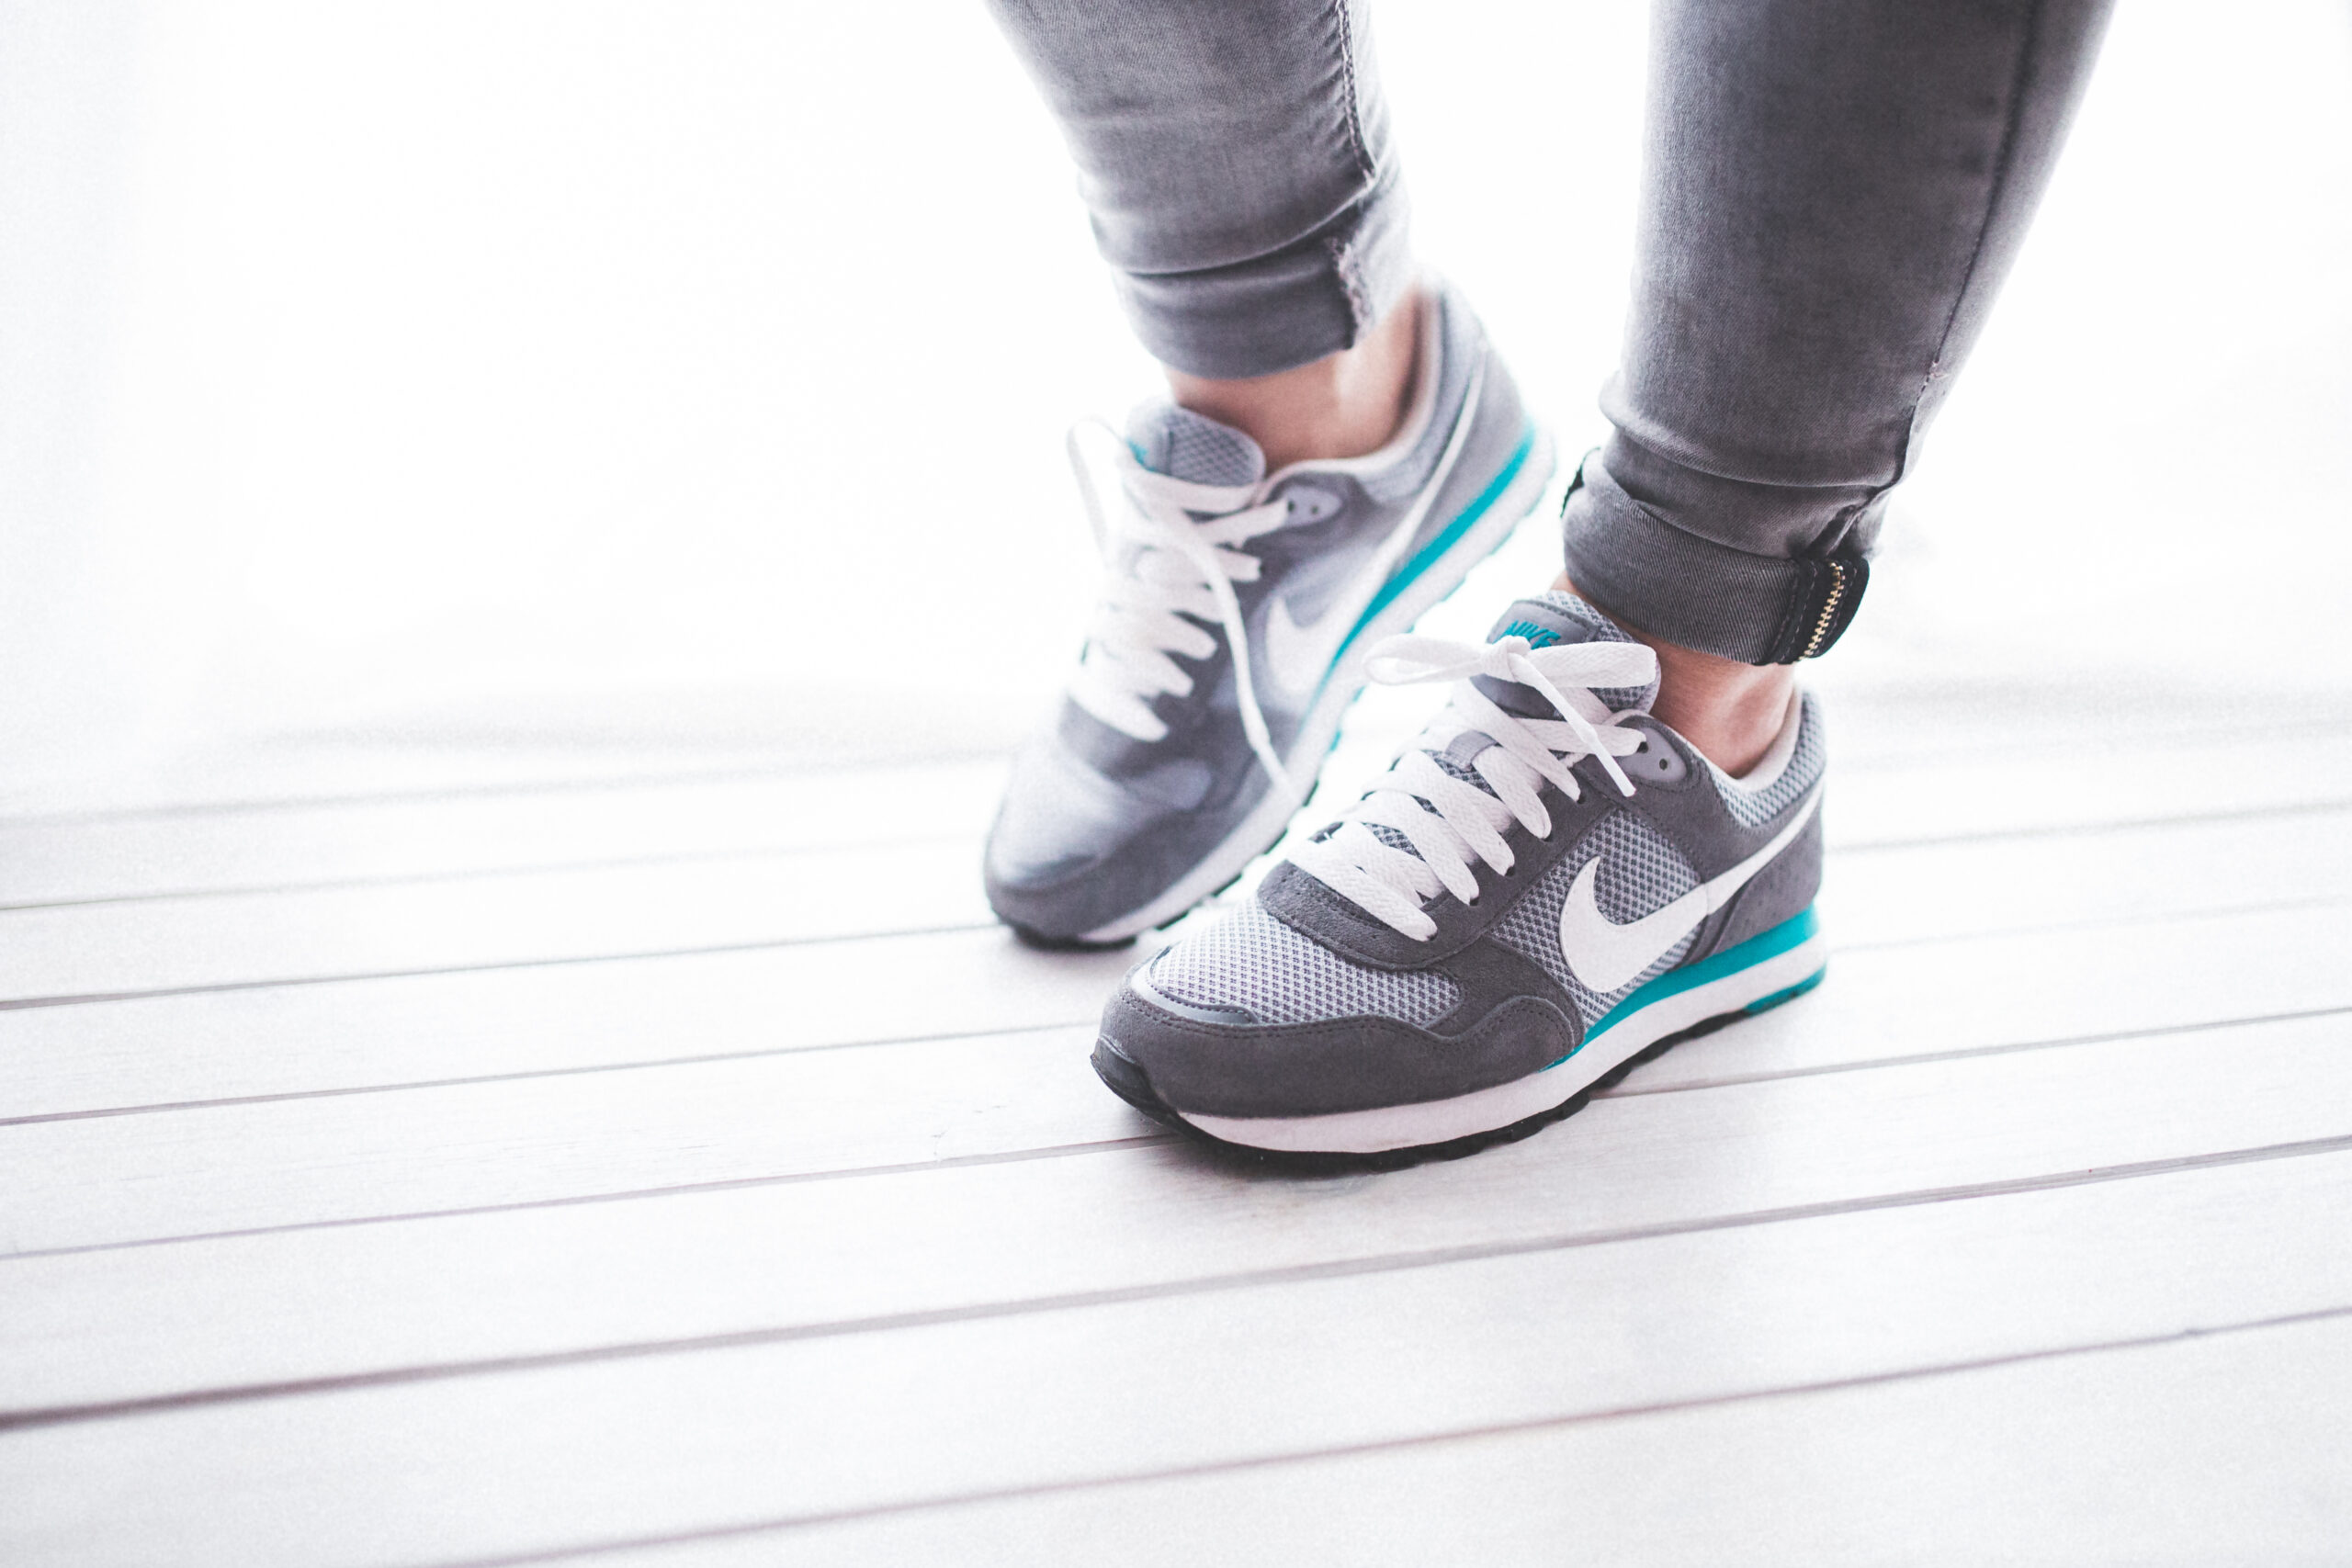 6 Lacing Hacks to Make Your Running Shoes Way More Comfortable